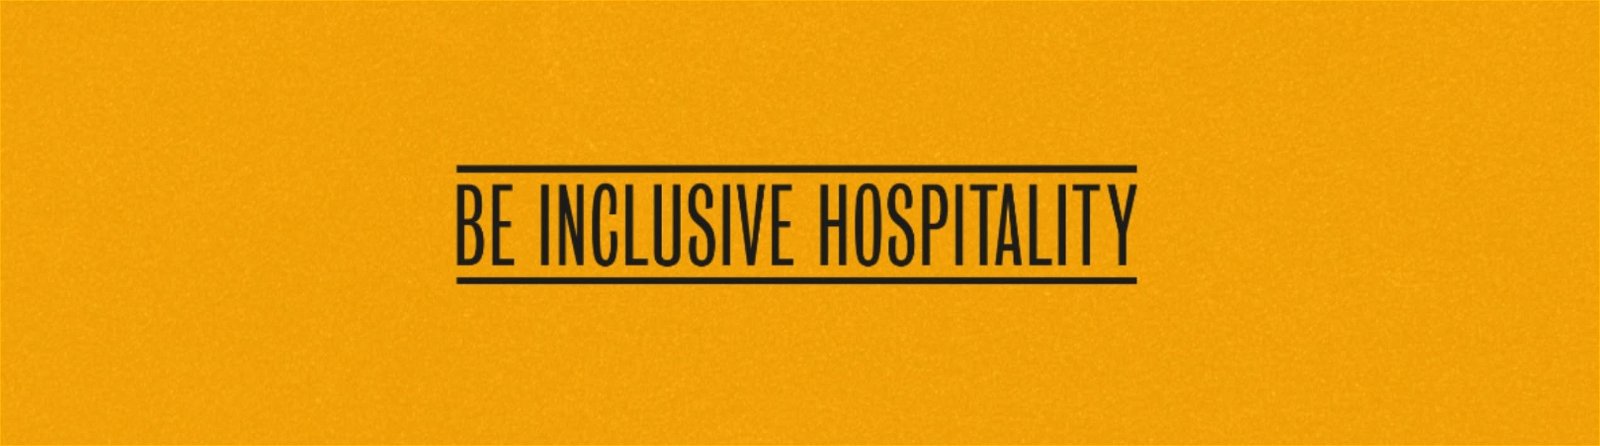 The new logo for Be Inclusive Hospitality